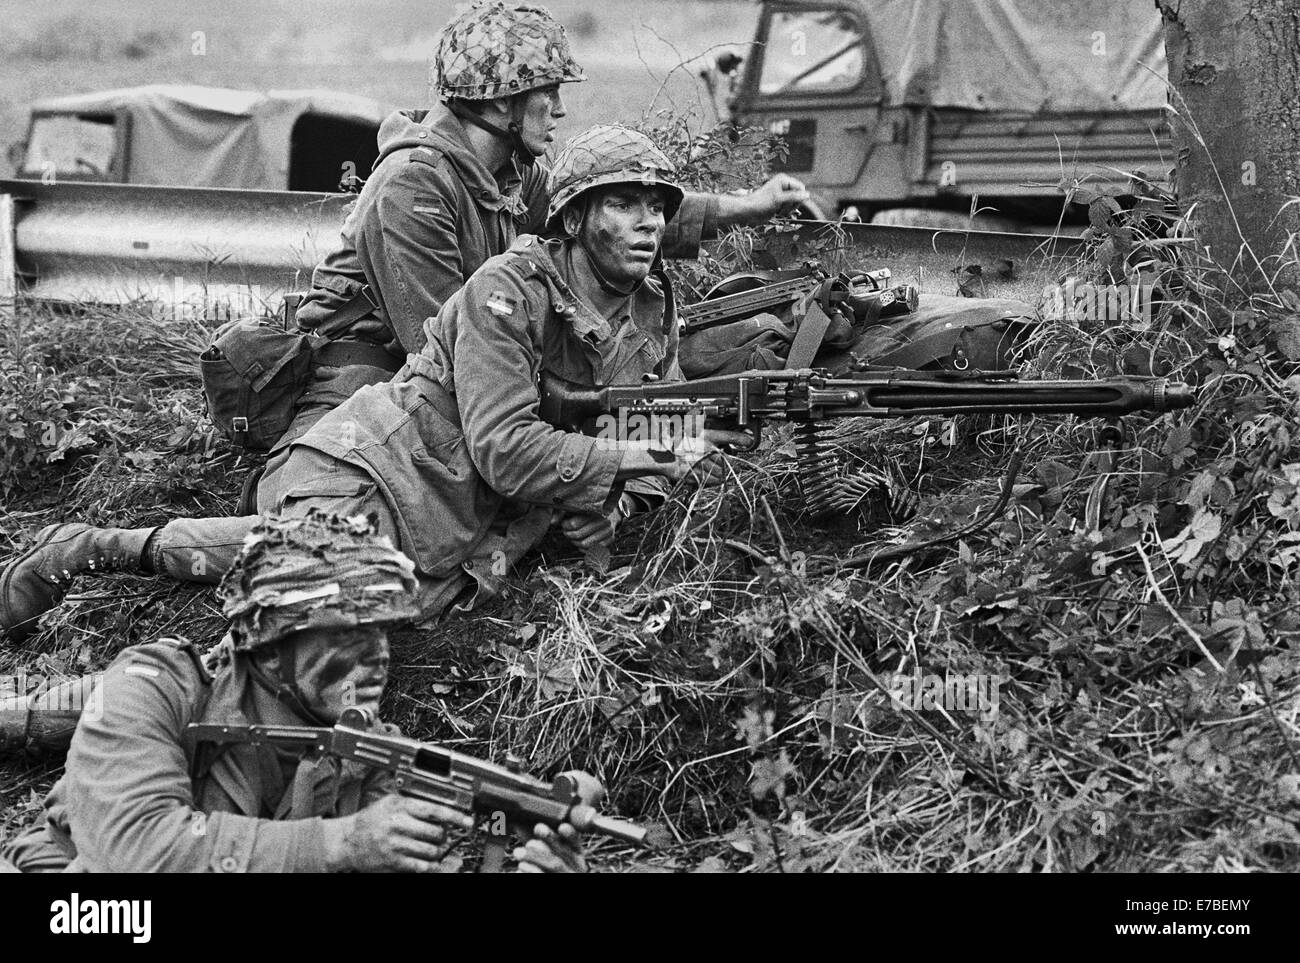 NATO exercises in Germany, German Army soldiers (September 1986) Stock Photo